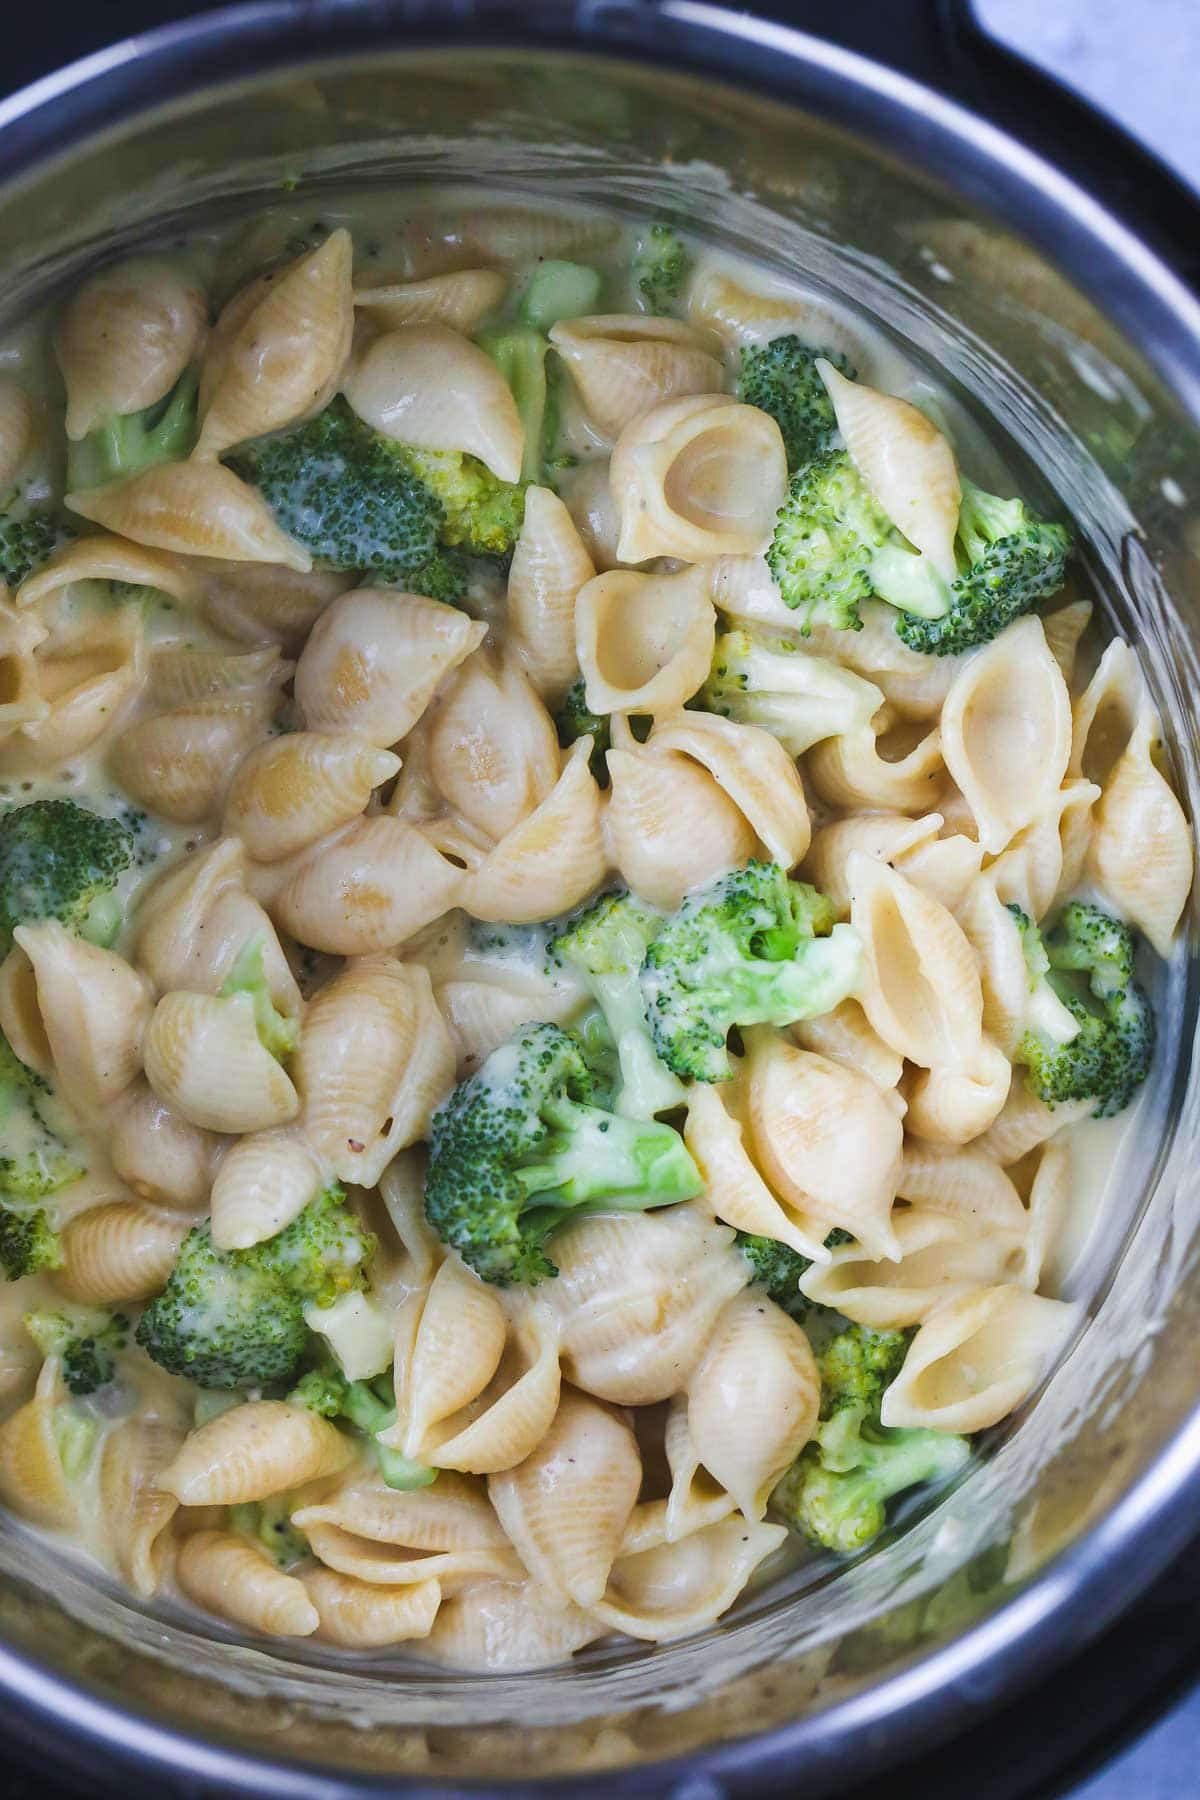 A close up picture of the Instant Pot Broccoli Mac and Cheese